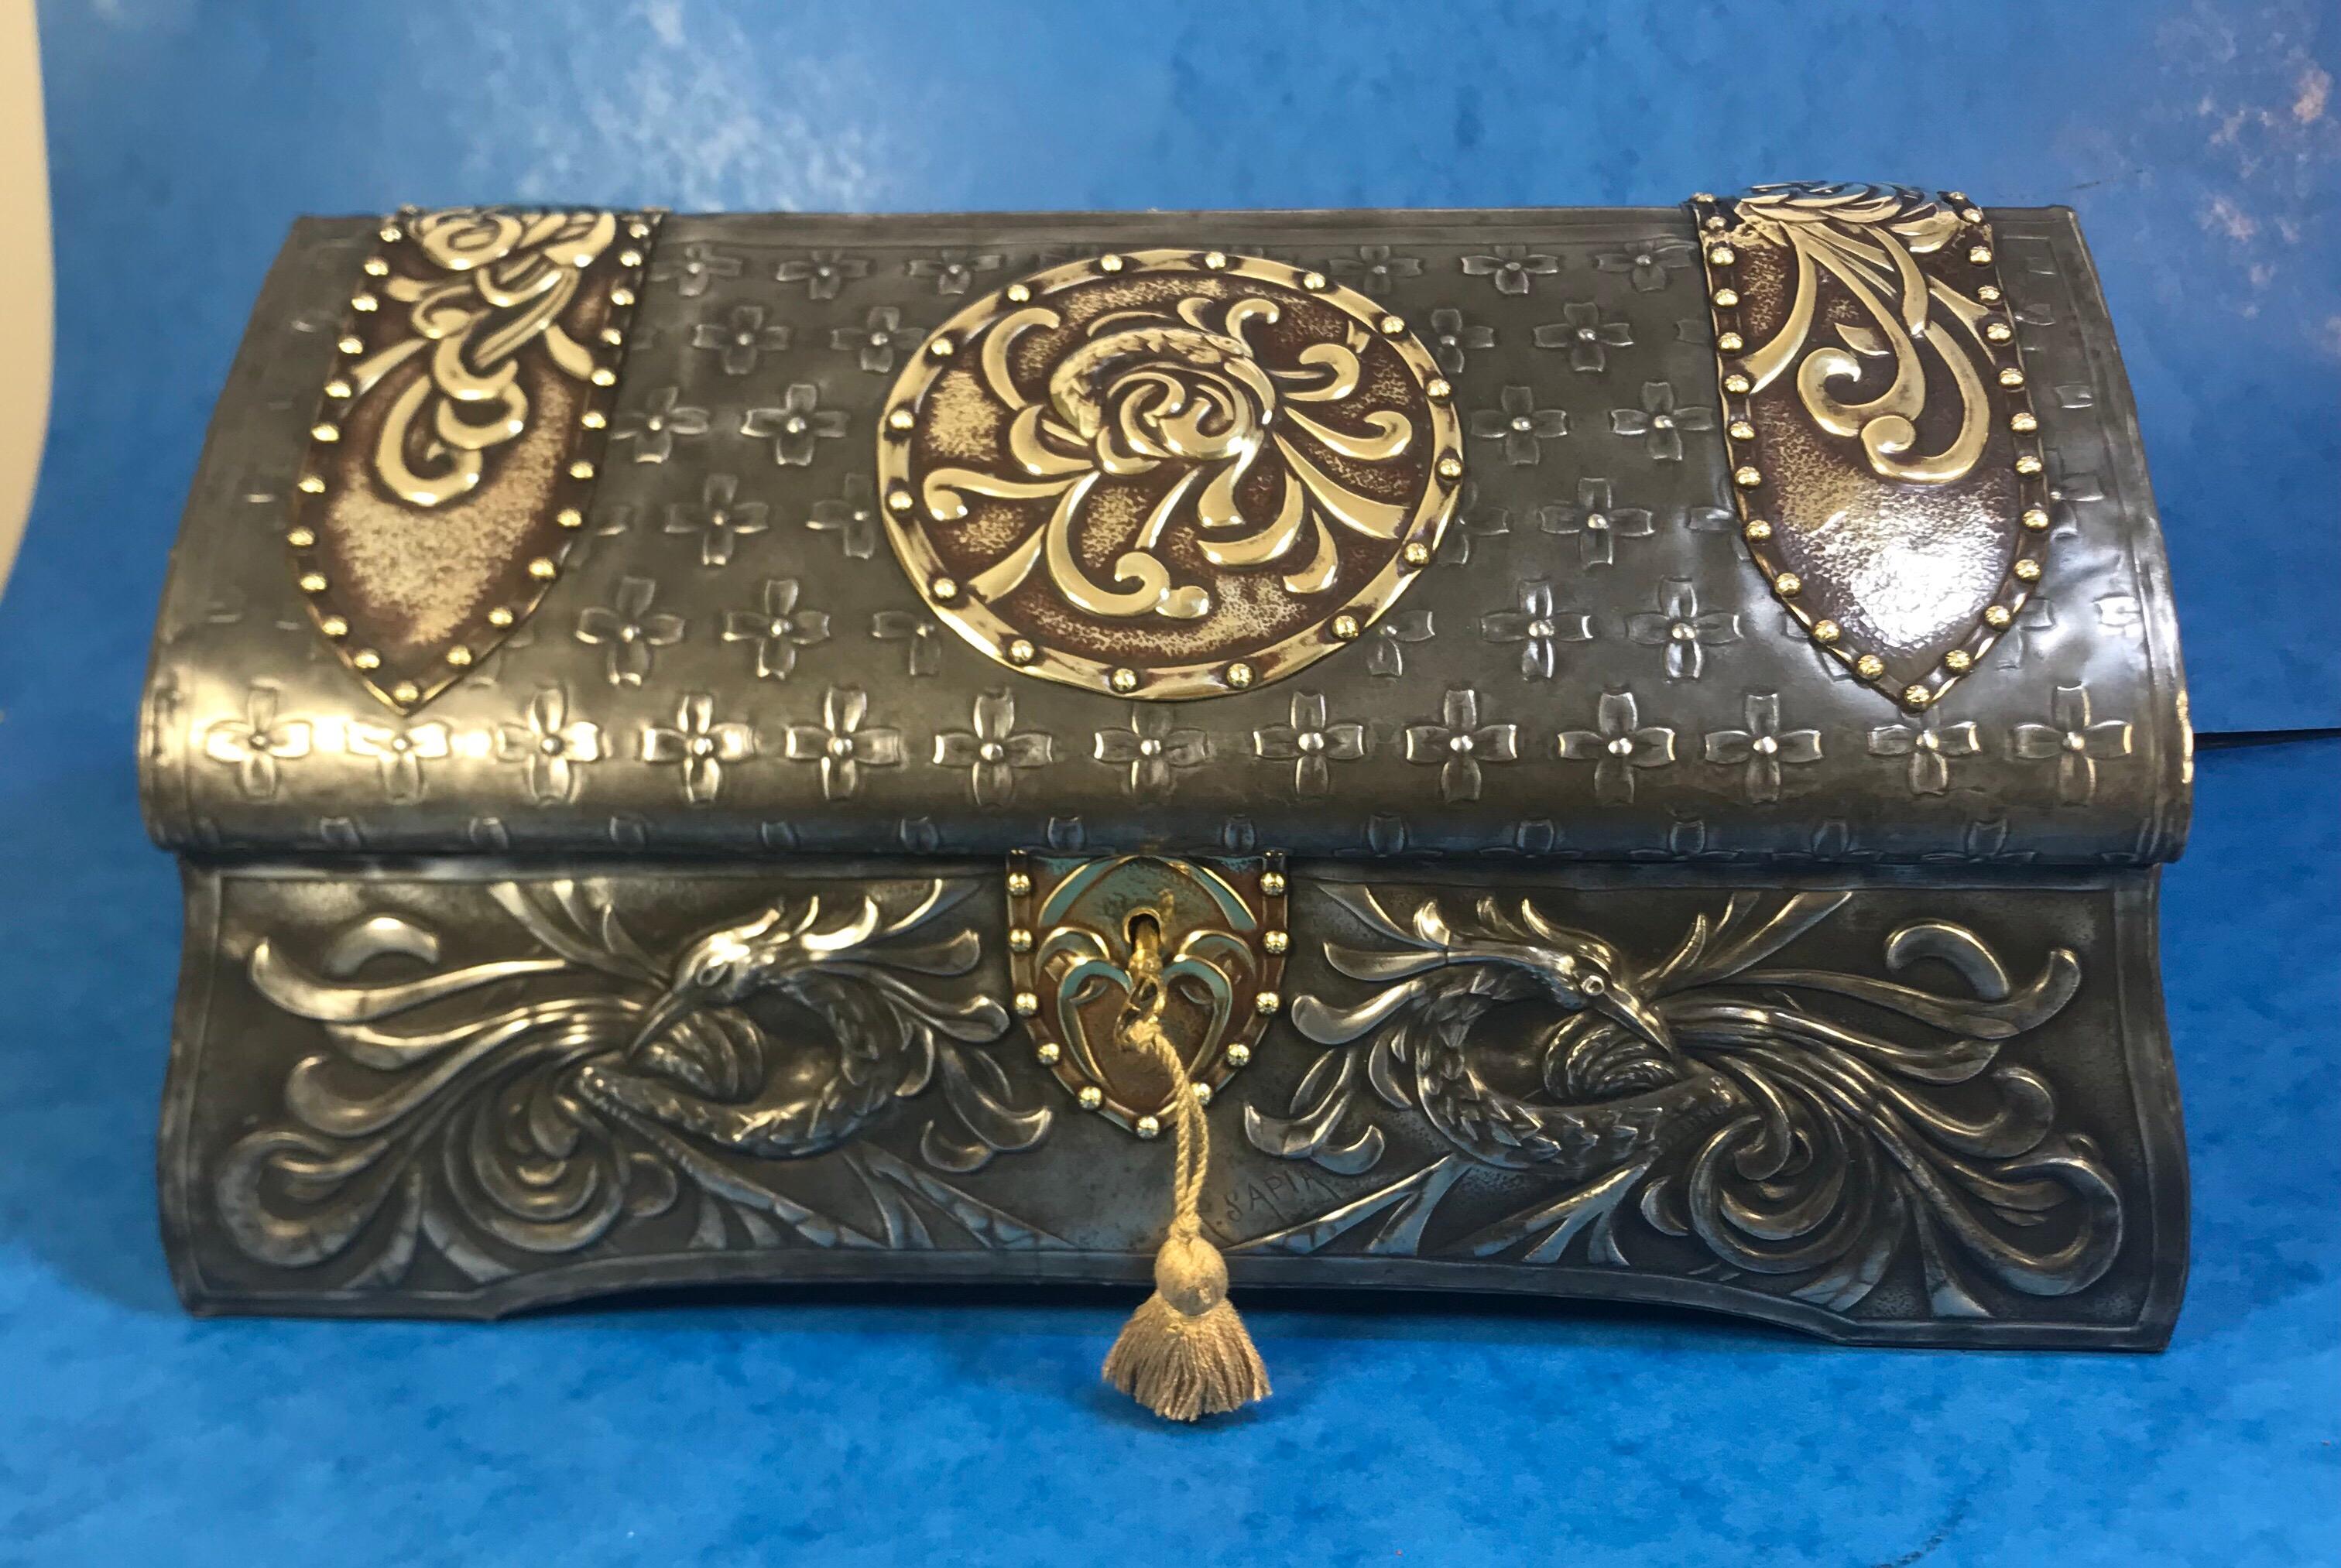 French Pewter Arts & Crafts box.
A very unusual and exquisite Medieval style Pewter and Brass box in superb condition, dating back to 1910. The box has a tented top with pattens and birds heads all around it. It comes with a working lock and key